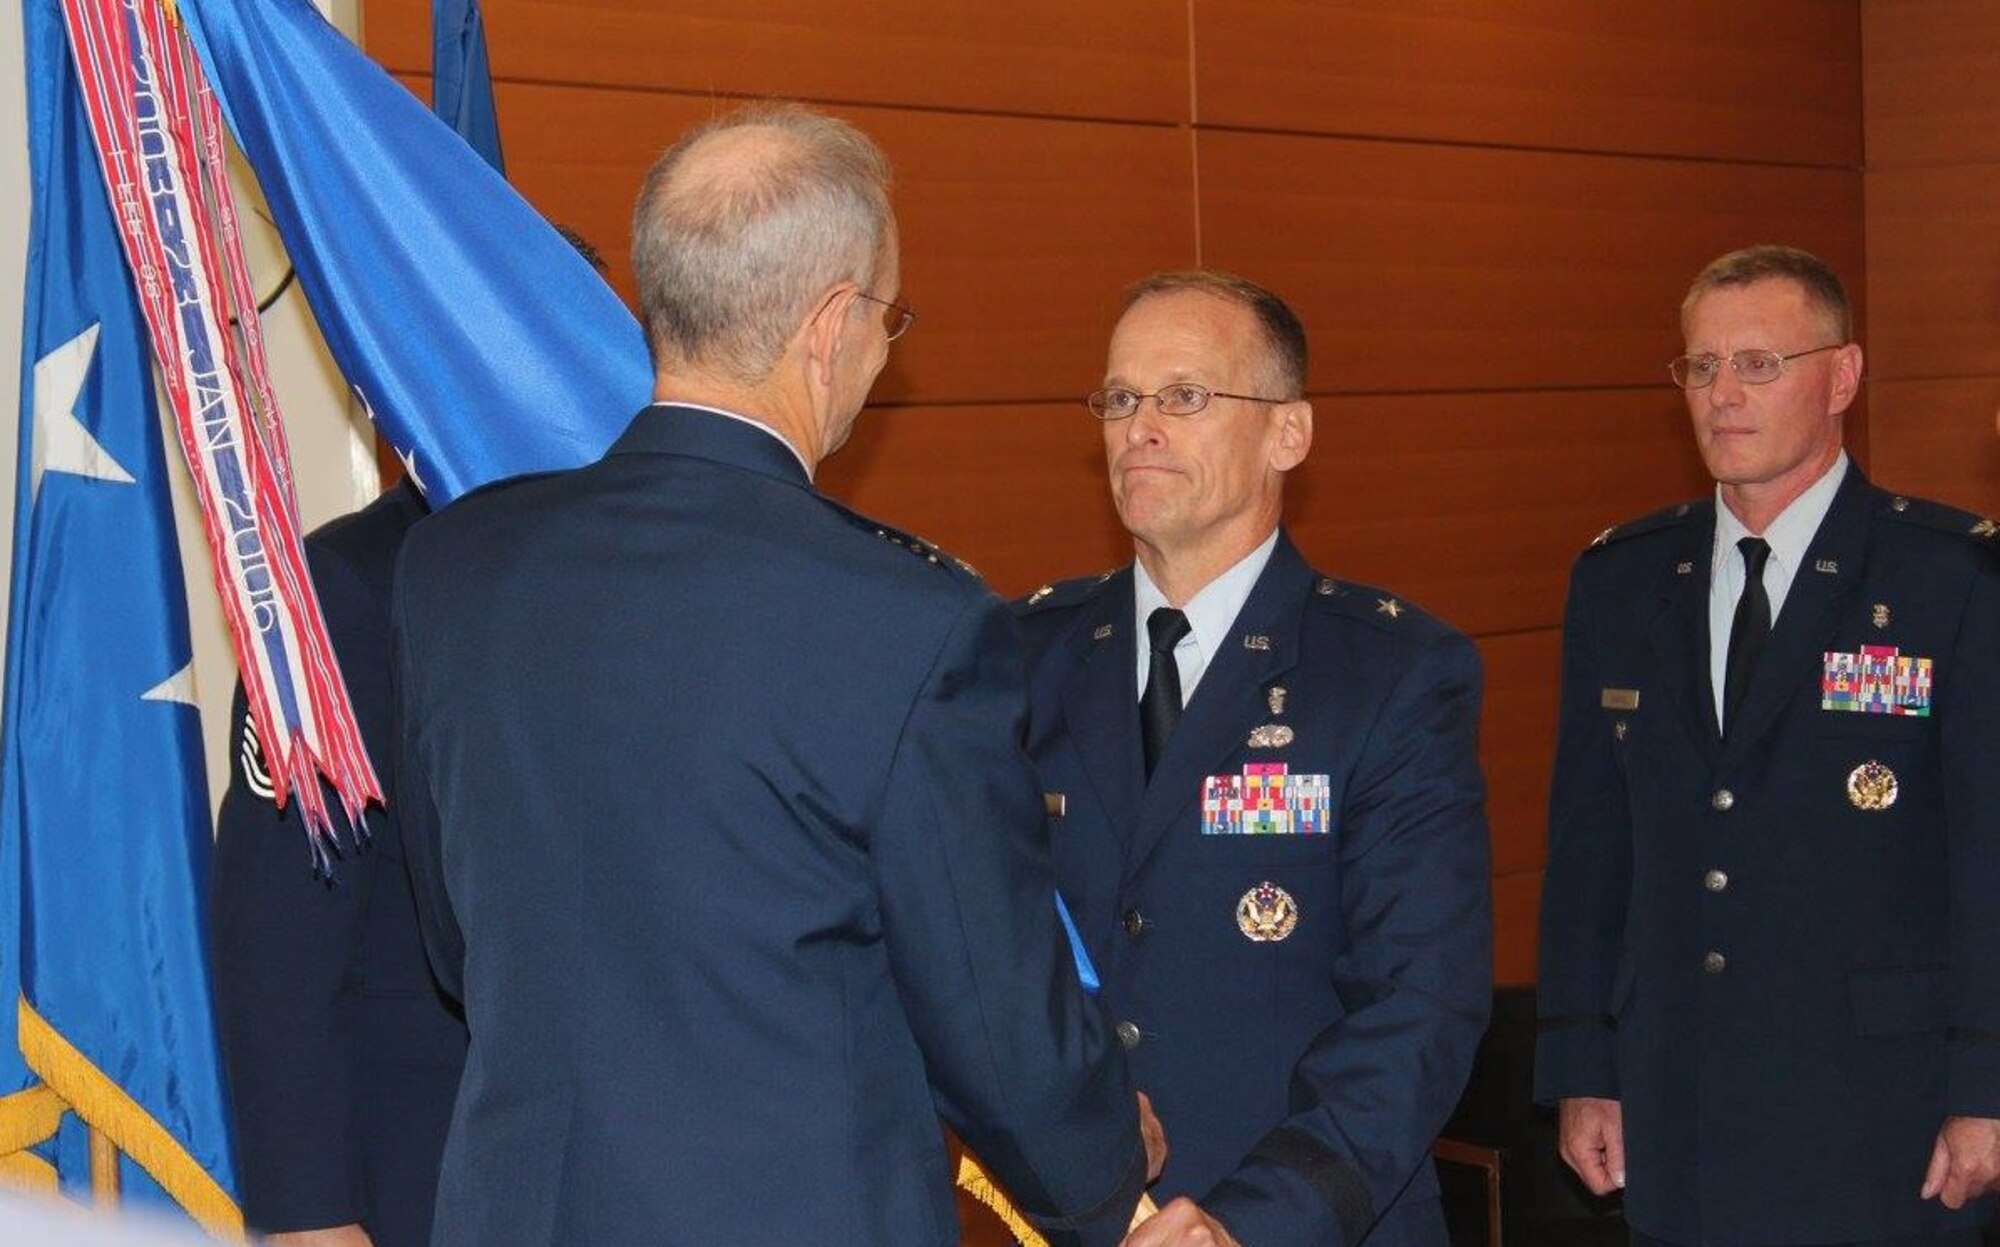 Lt. Gen. (Dr.) Mark Ediger, the Air Force Surgeon General, passed command of the Air Force Medical Support Agency to Col. Dean Borsos during a change of command ceremony Aug. 30 at the Defense Health Headquarters in Falls Church, Va. Borsos assumed command of AFMSA from Brig. Gen. James McClain.  